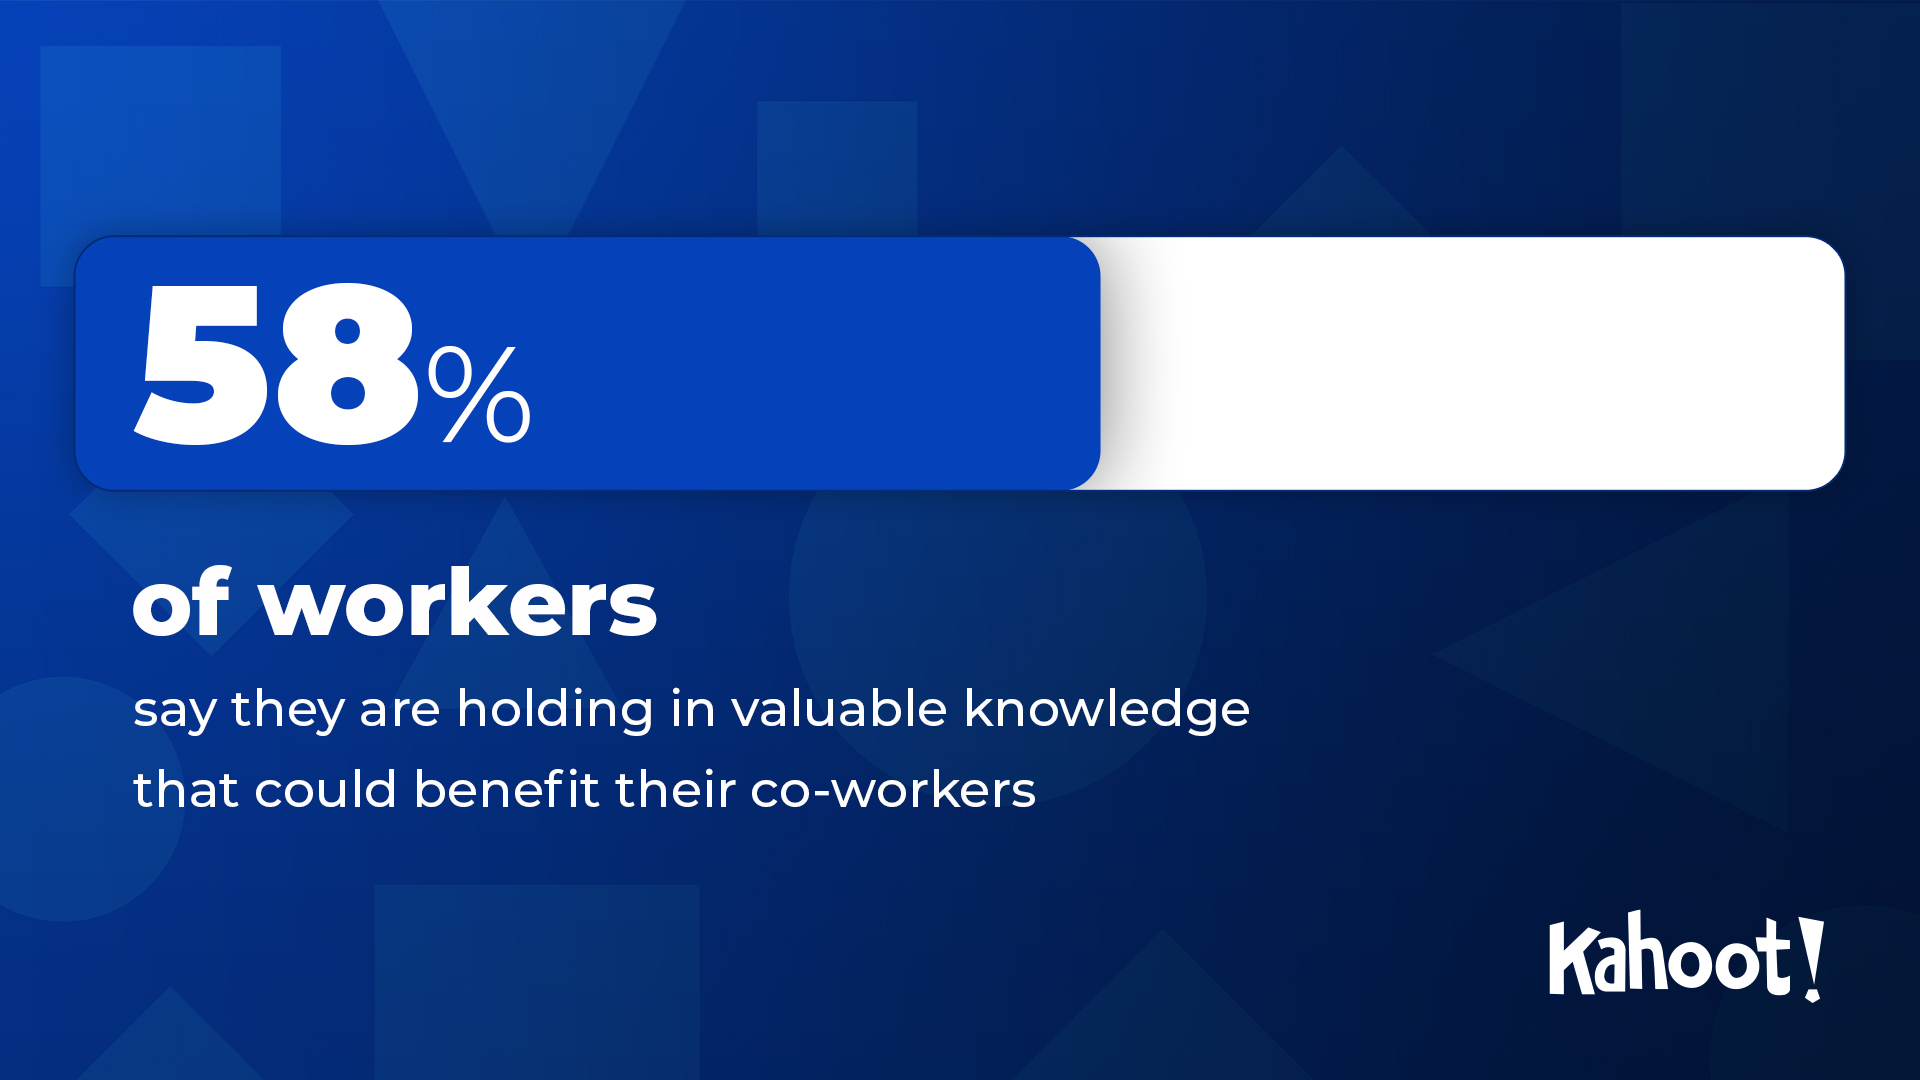 58% of workers say they are holding in valuable knowledge that could benefit their co-workers